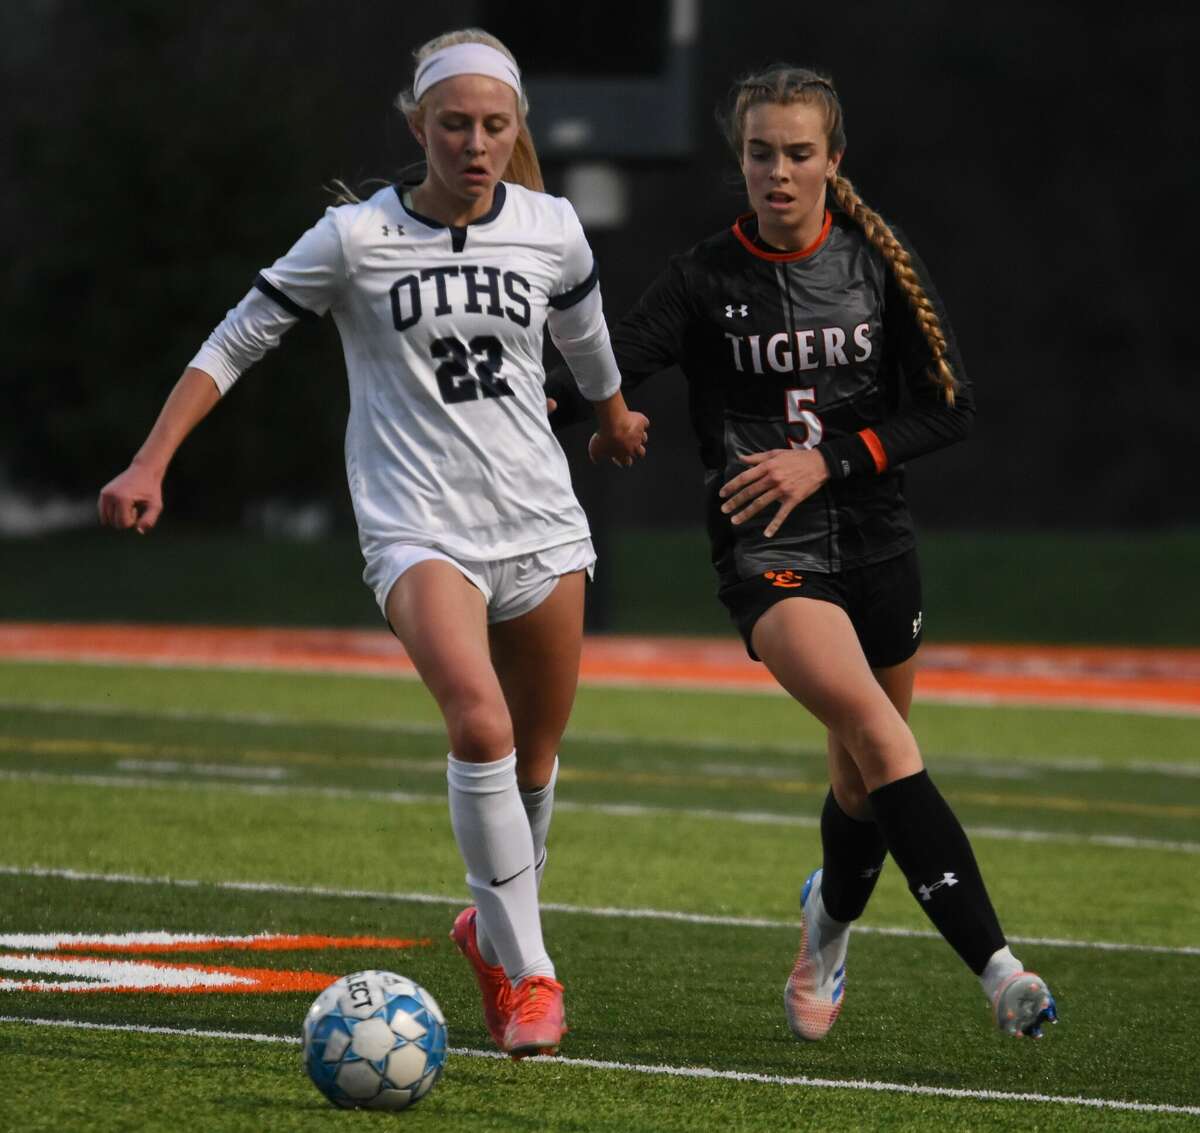 Edwardsville's Blakely Hockett, right, scored the game's only goal in a 1-0 victory over Collinsville on Tuesday in Collinsville.